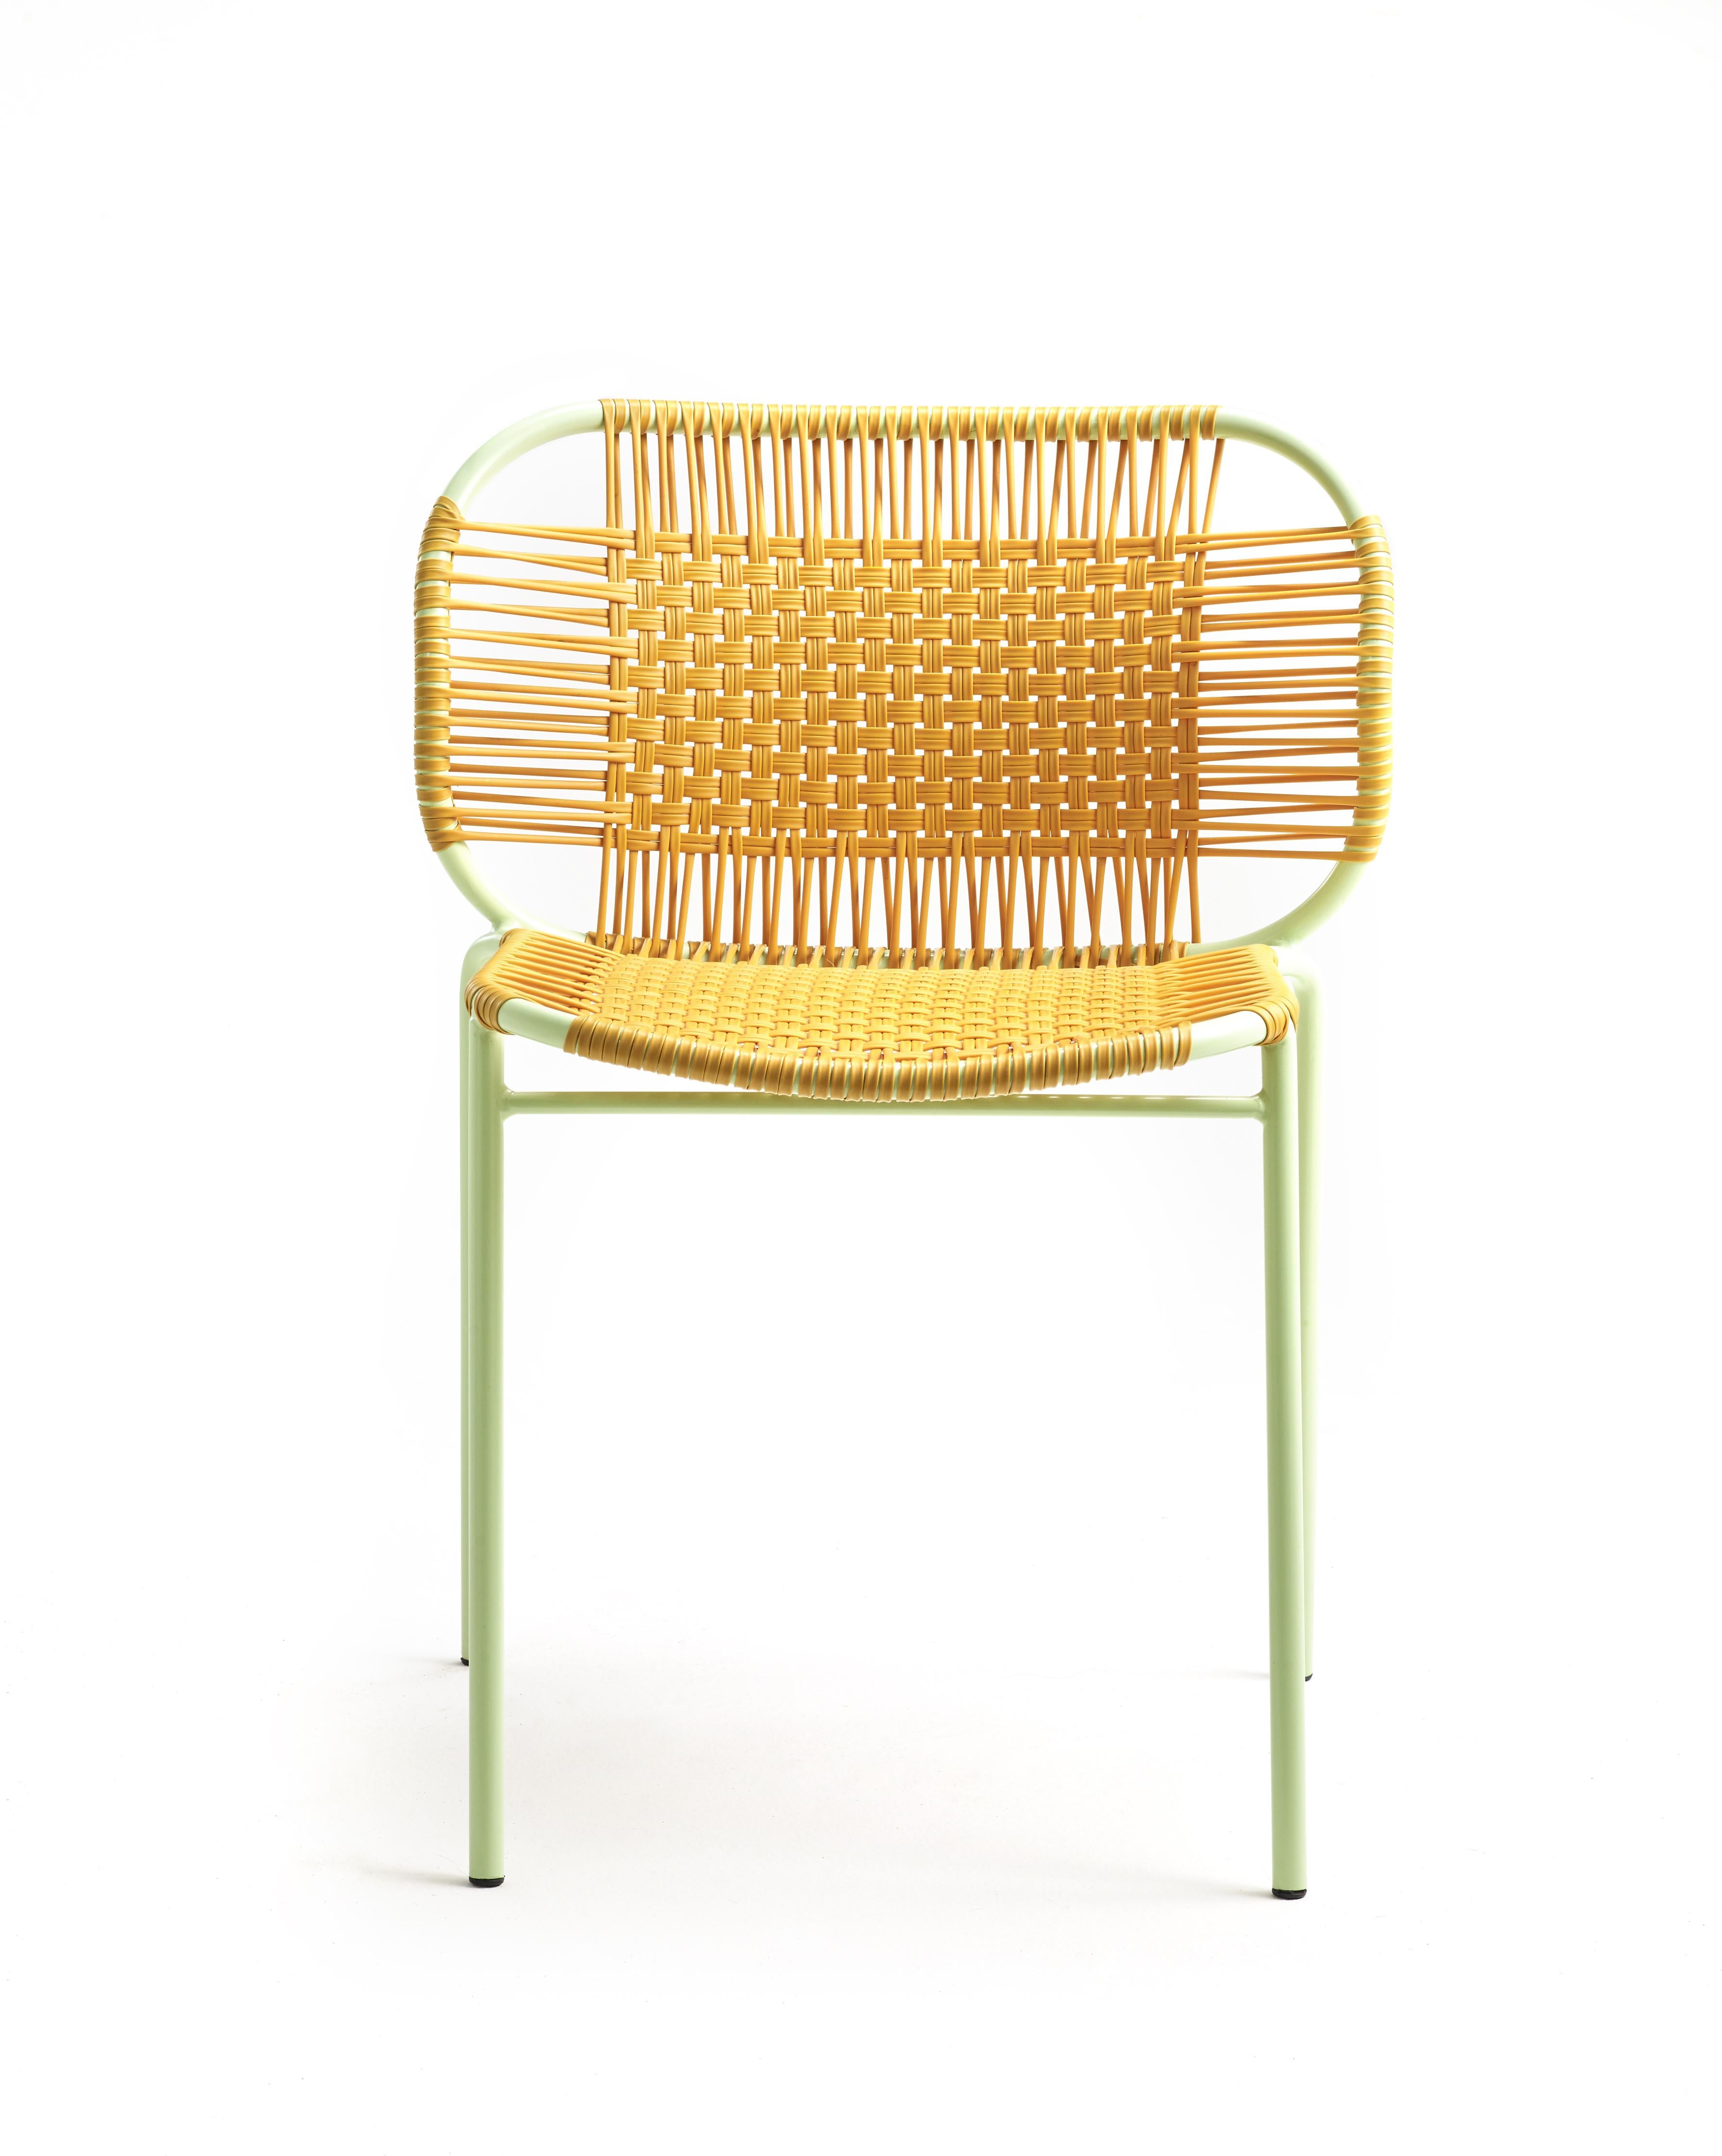 Set of 2 Honey Cielo stacking chair by Sebastian Herkner
Materials: PVC strings, powder-coated steel frame. 
Technique: Made from recycled plastic and weaved by local craftspeople in Cartagena, Colombia. 
Dimensions: W 56 x D 51.4 x H 78 cm